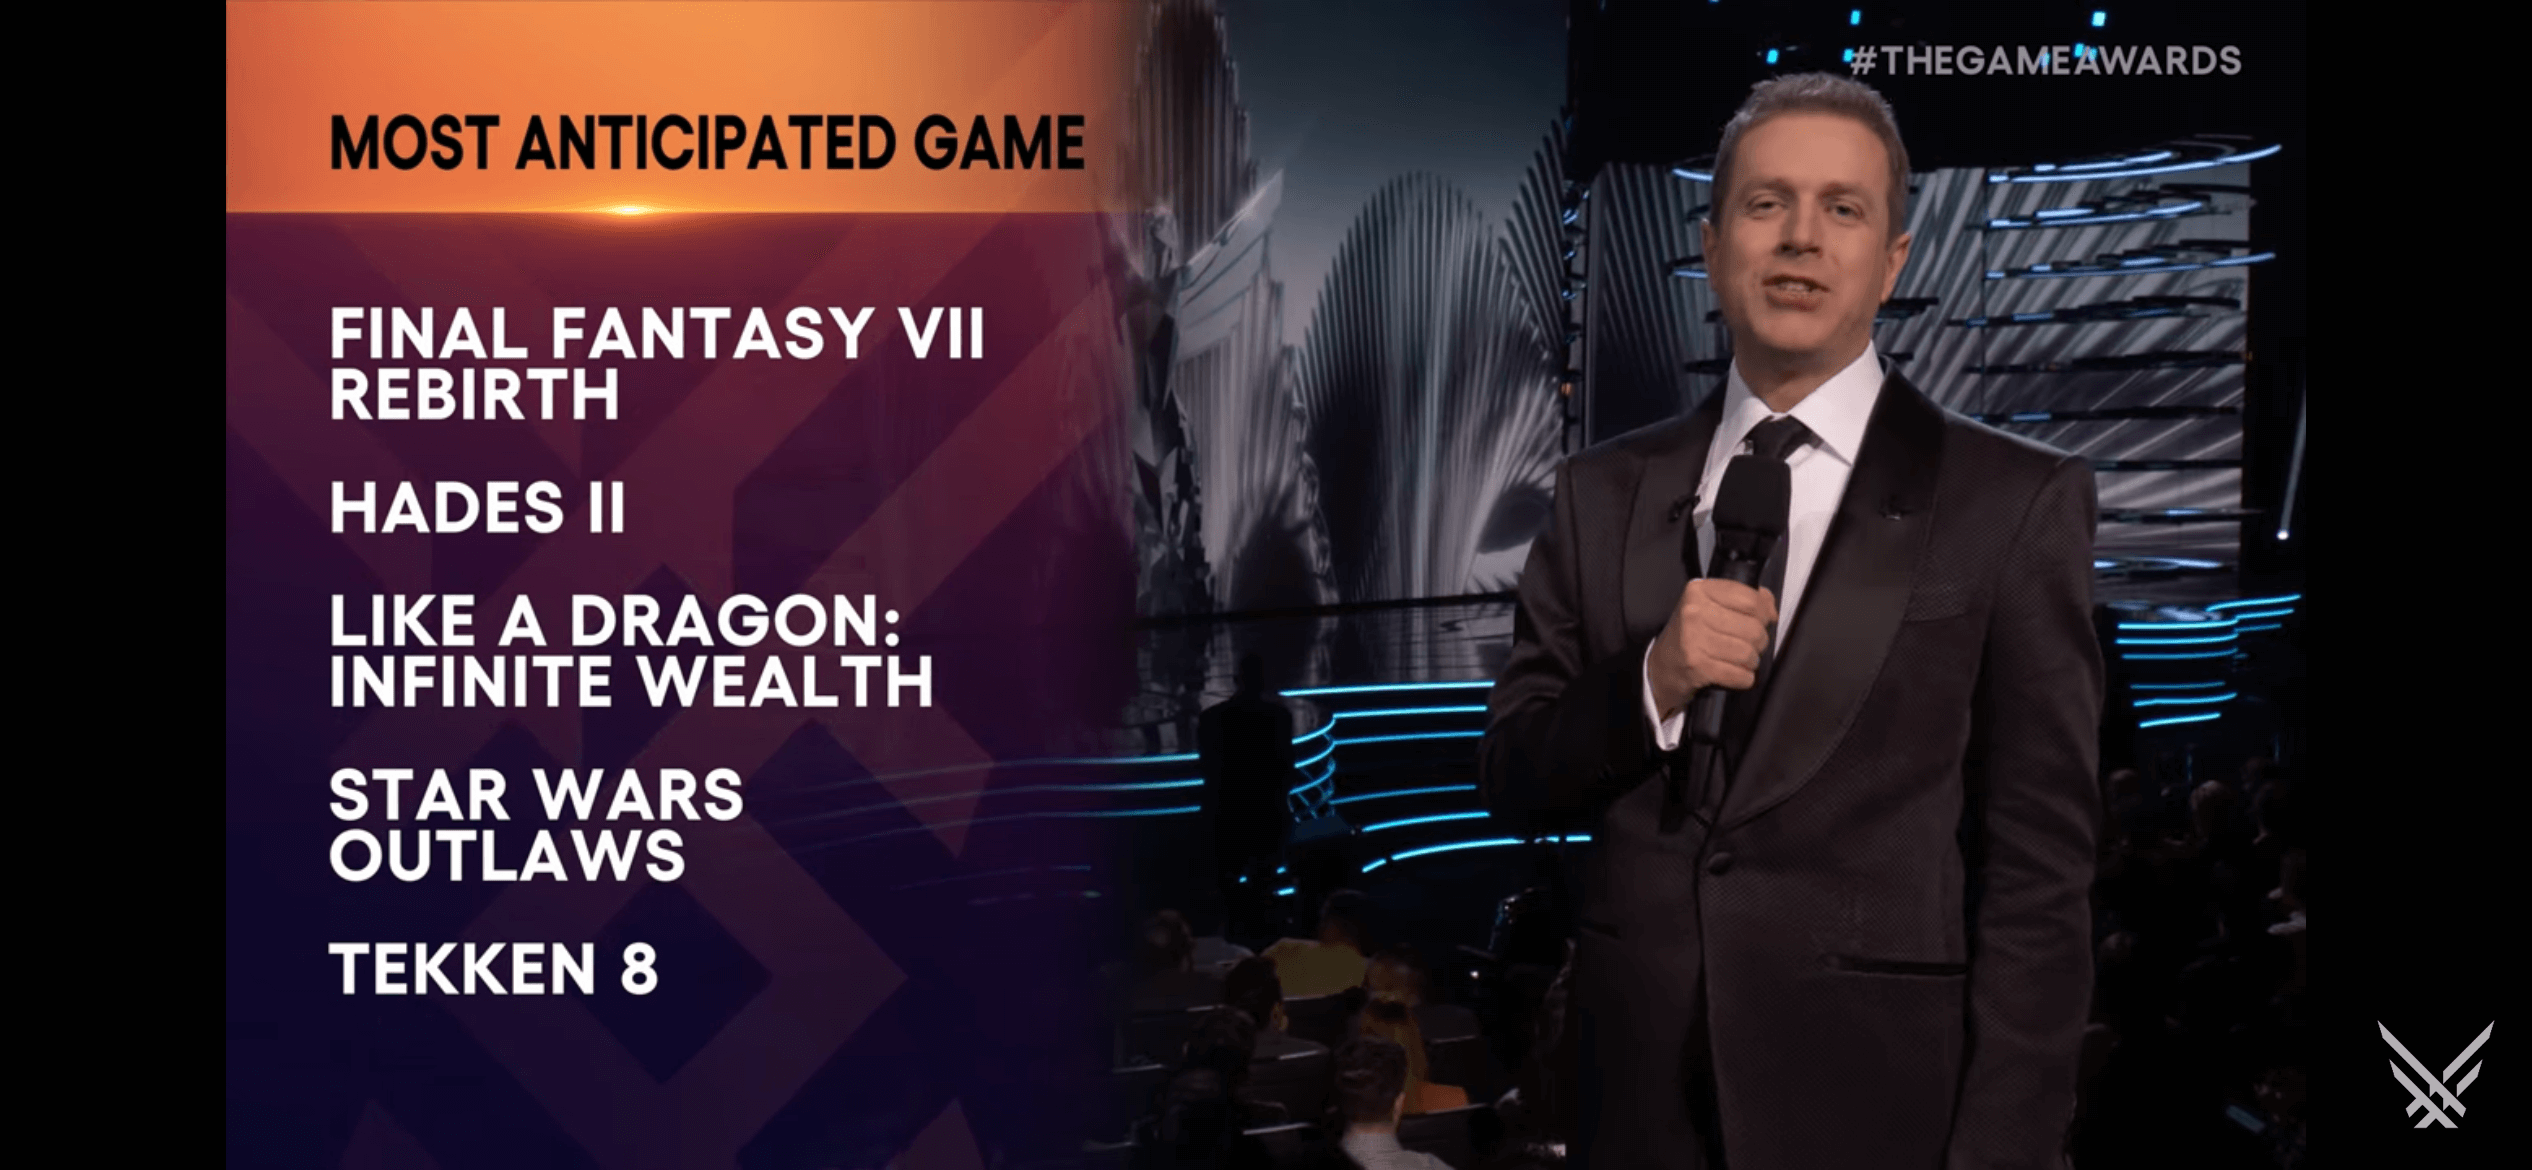 Geoff Keighley presenting the award for most anticipated game during a quick fire section.